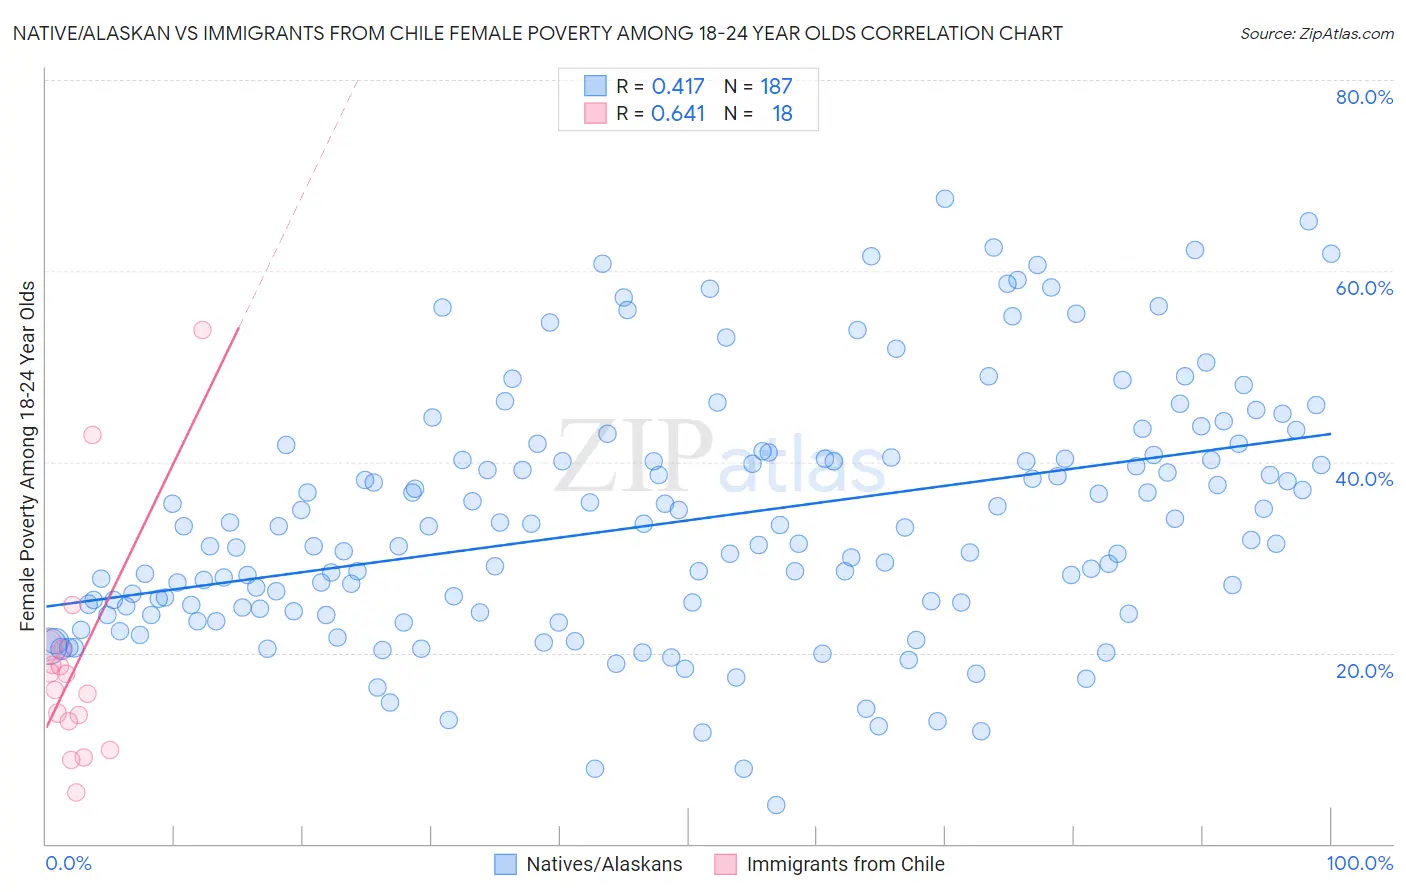 Native/Alaskan vs Immigrants from Chile Female Poverty Among 18-24 Year Olds